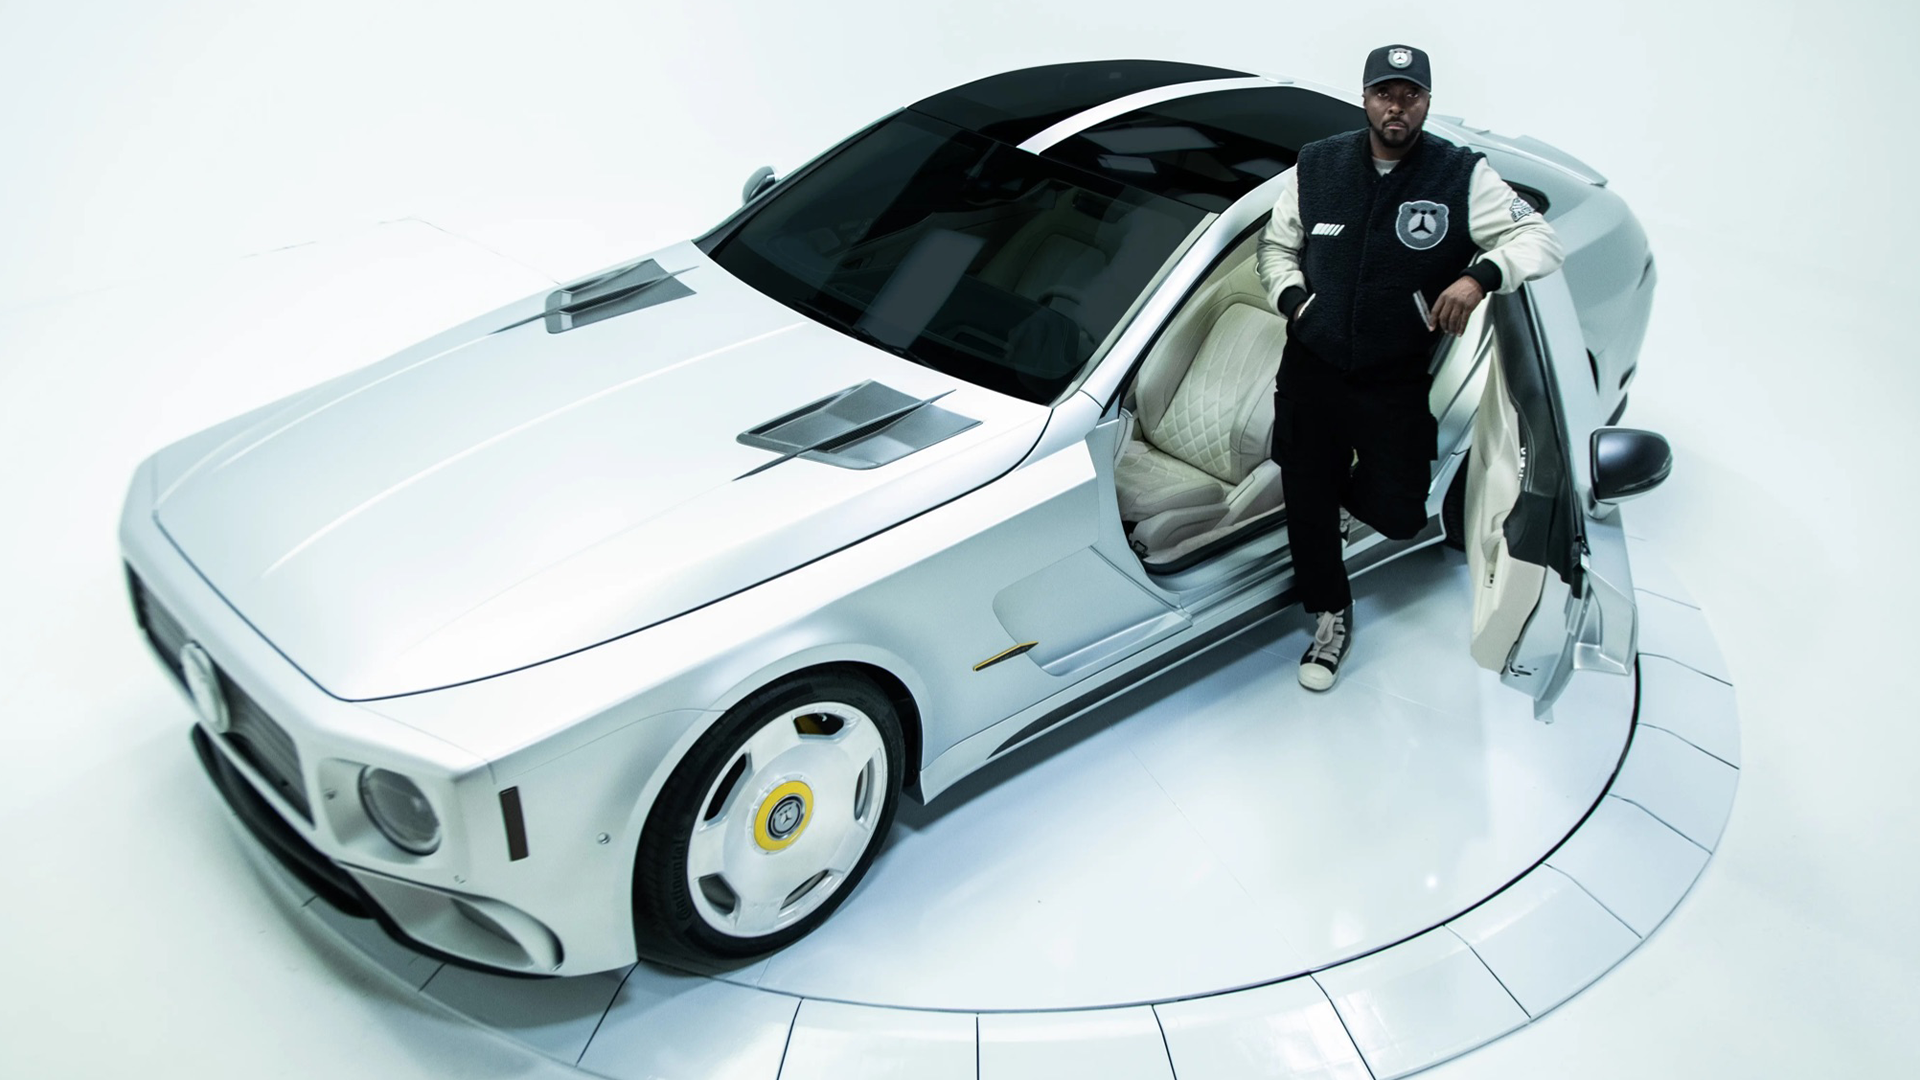 will.i.am And Mercedes-AMG's Latest Collaboration Gives Underserved Students Access To STEAM